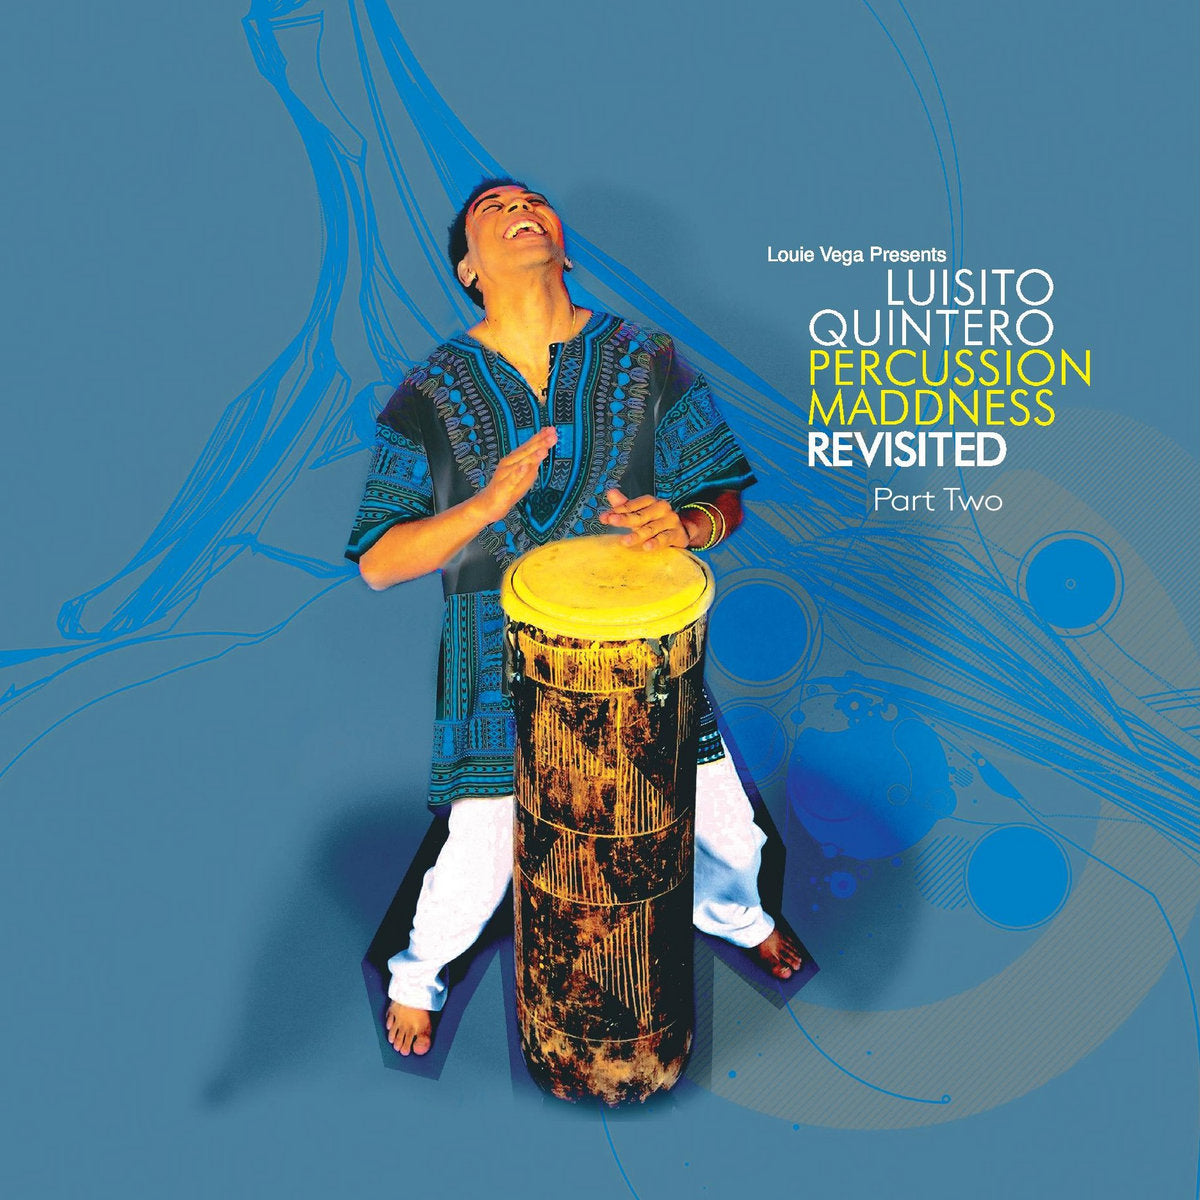 Percussion Maddness Revisited – Part Two (New 2LP)